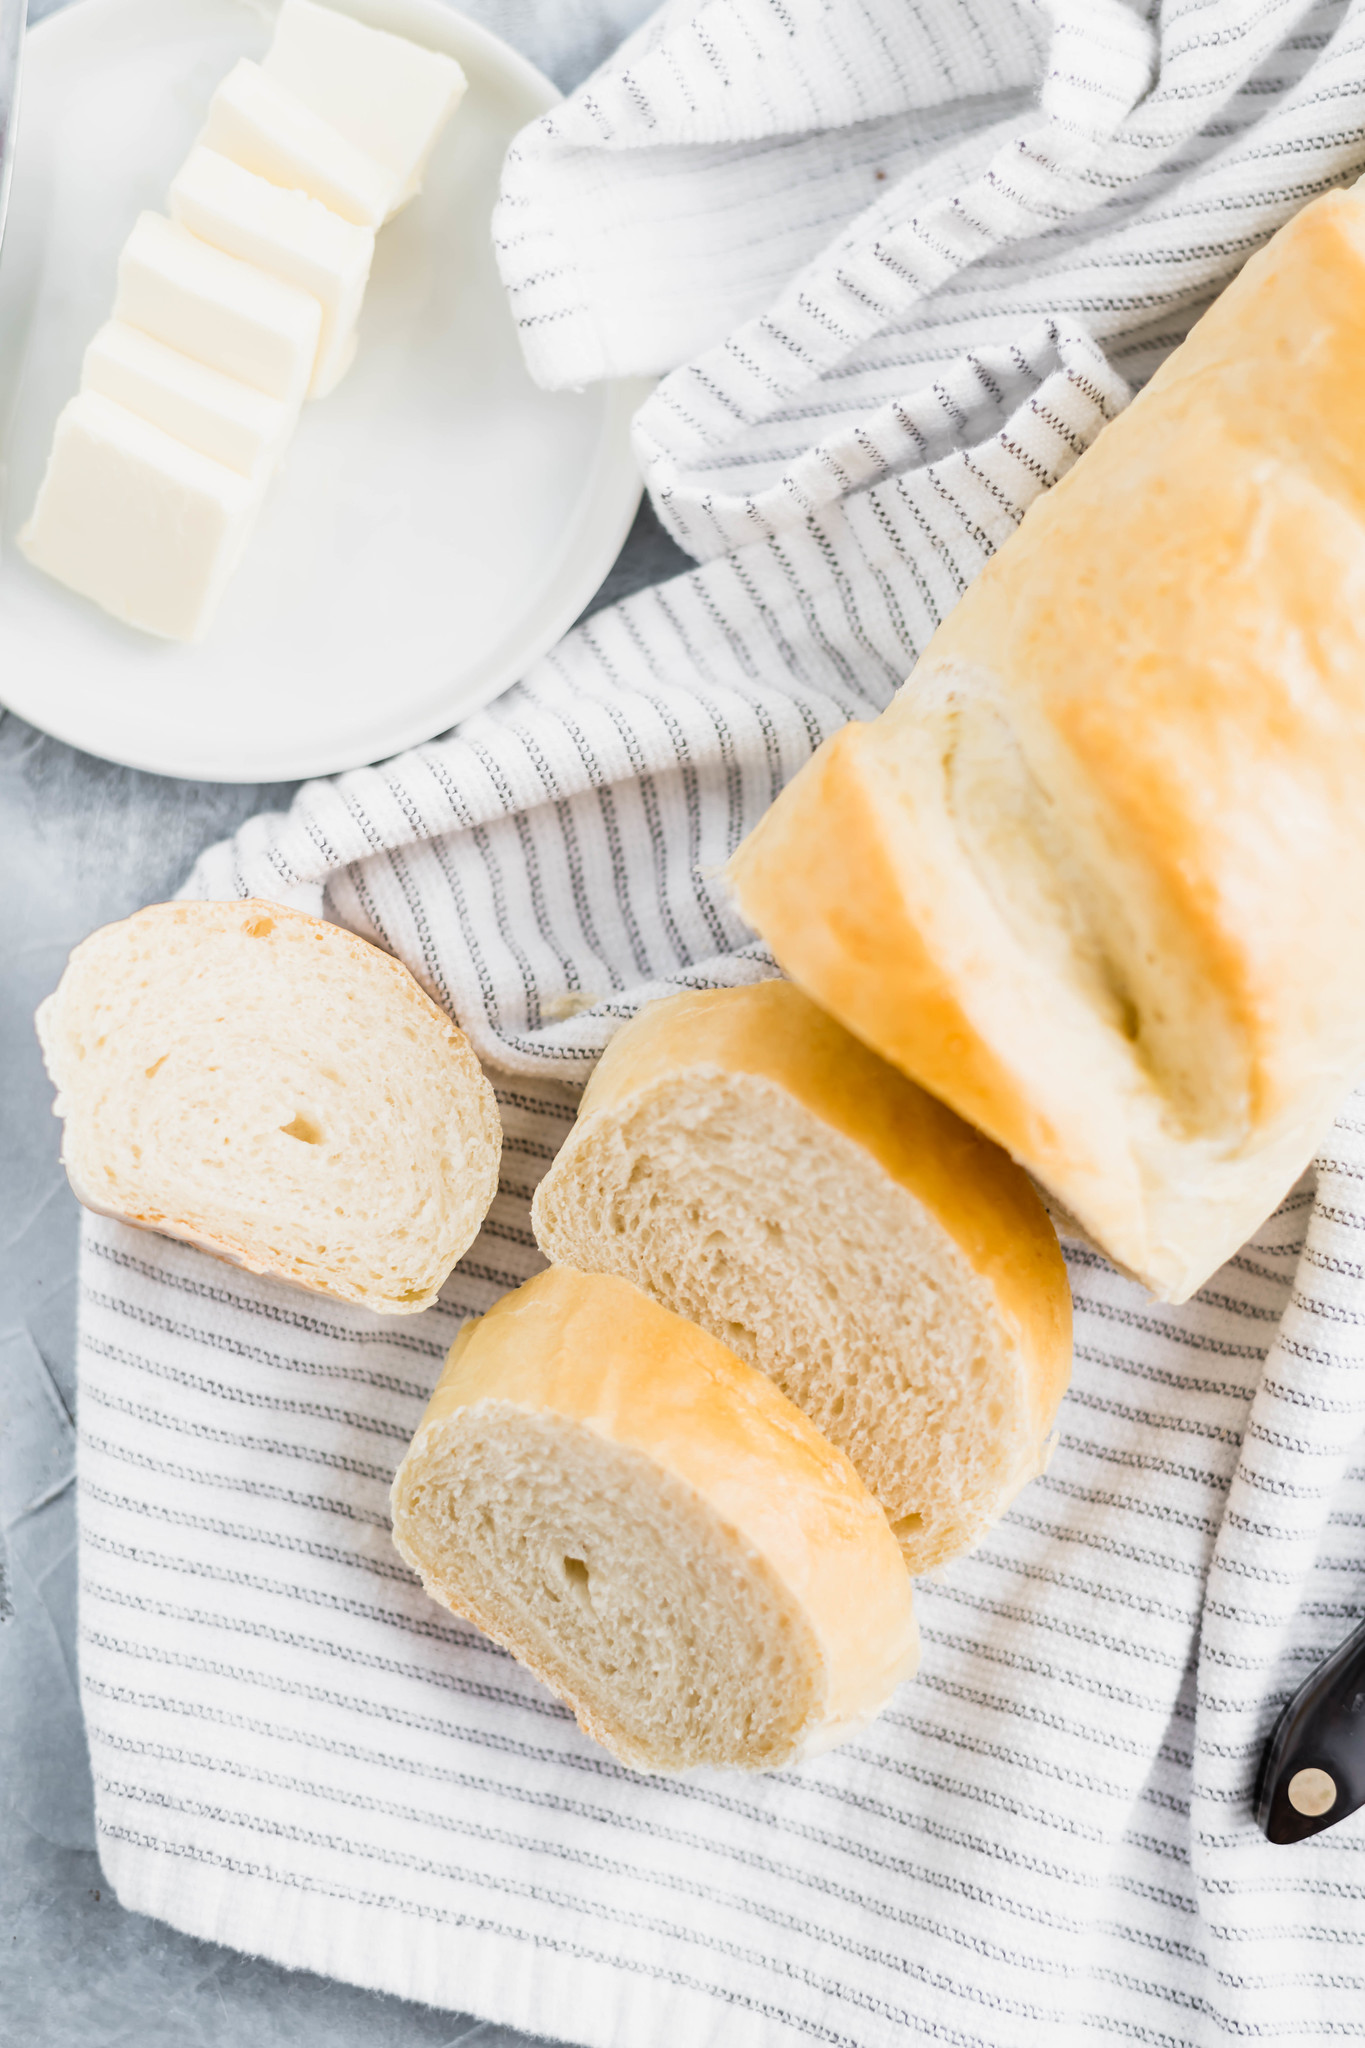 Don't be intimated by homemade bread. This Easy French Bread is super simple and yields two beautifully delicious loaves.